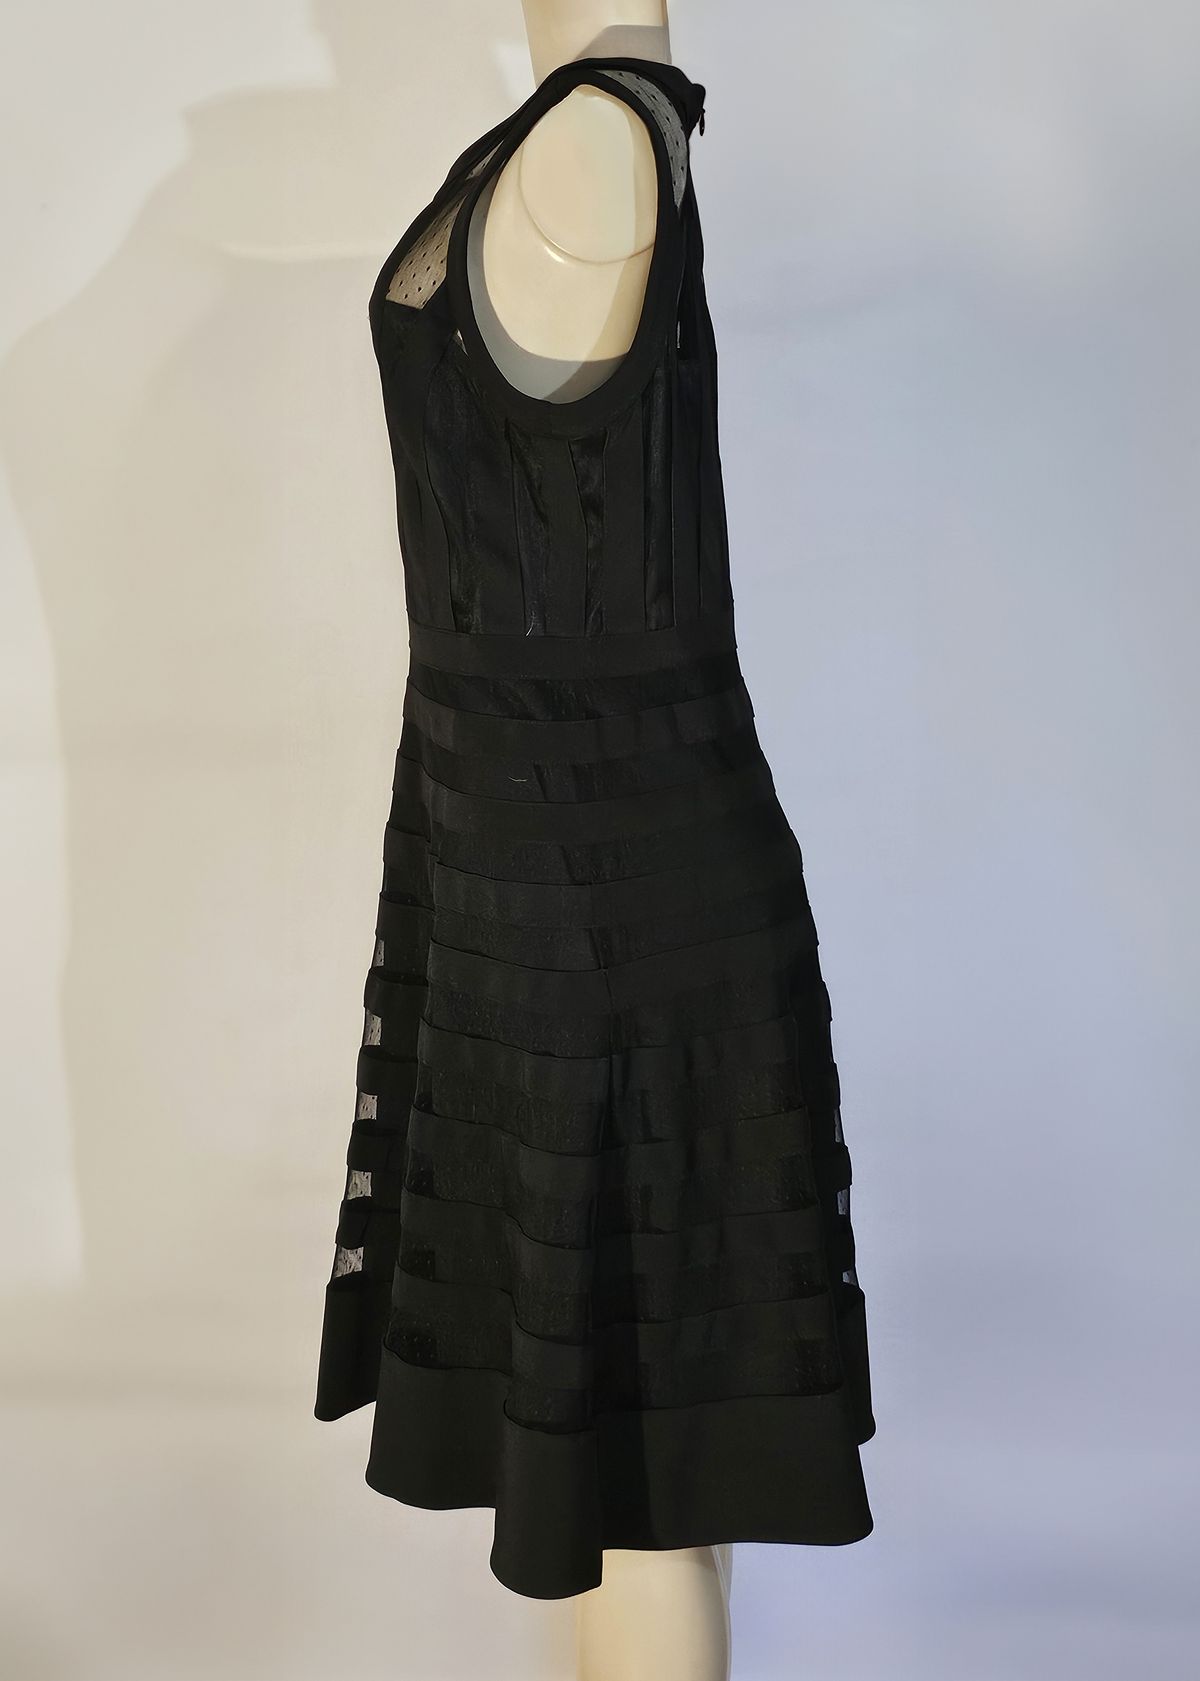 White House Black Market Size 12 Lace Black Cocktail Dress on Queenly